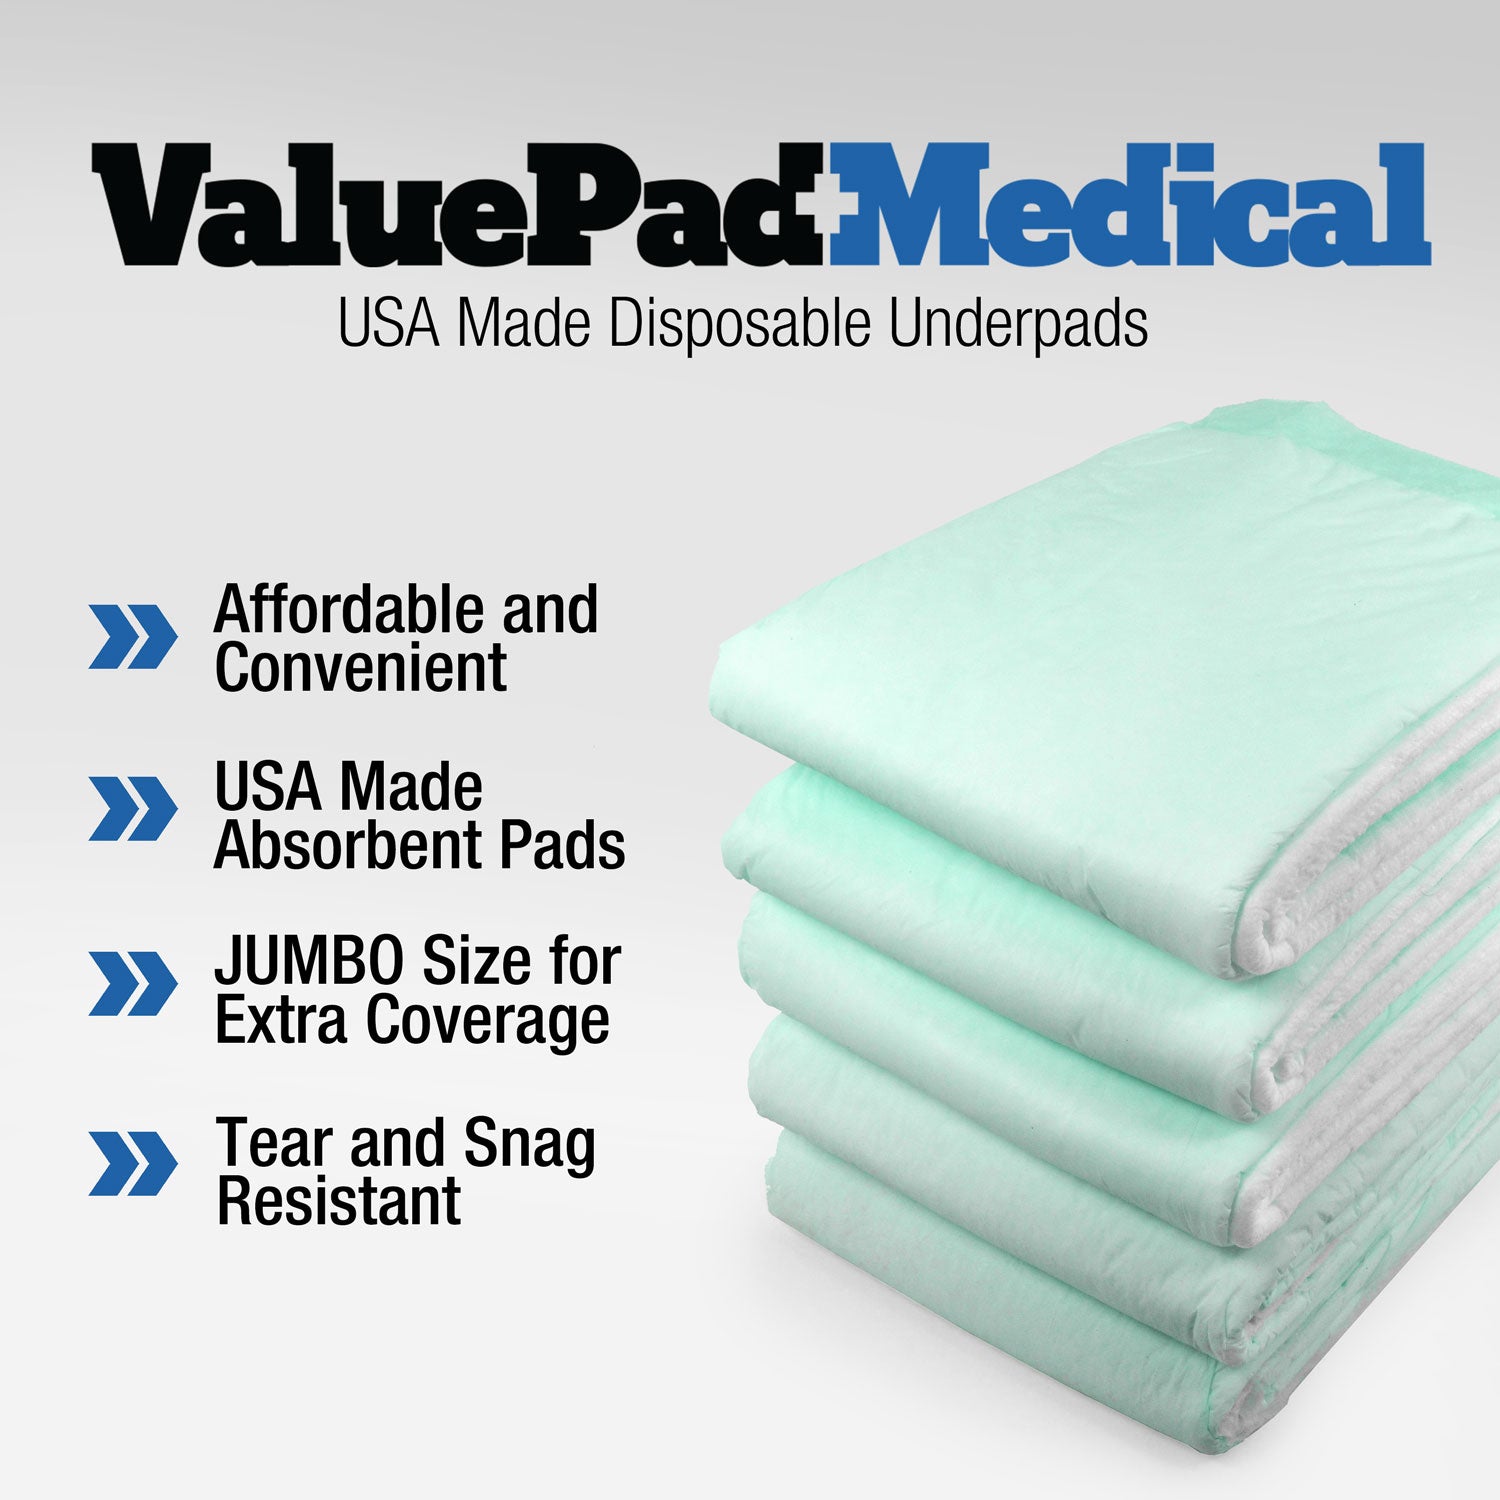 ValuePad USA Disposable Underpads for Incontinence, Bedwetting and Pets, Large 30"x30", 150 ct